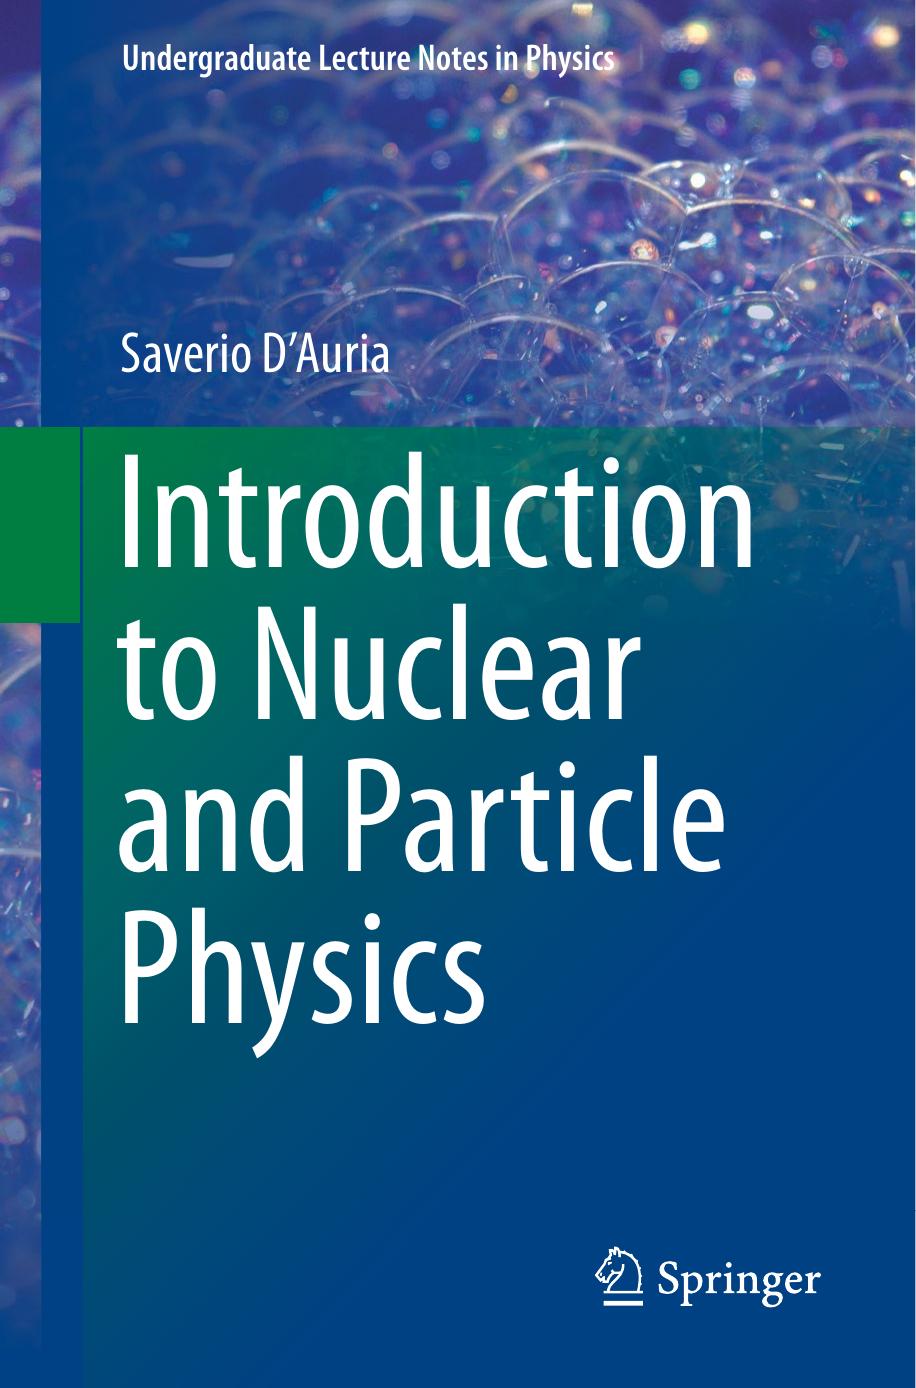 Introduction to Nuclear and Particle Physics 2018 ( PDFDrive.com ) (2)